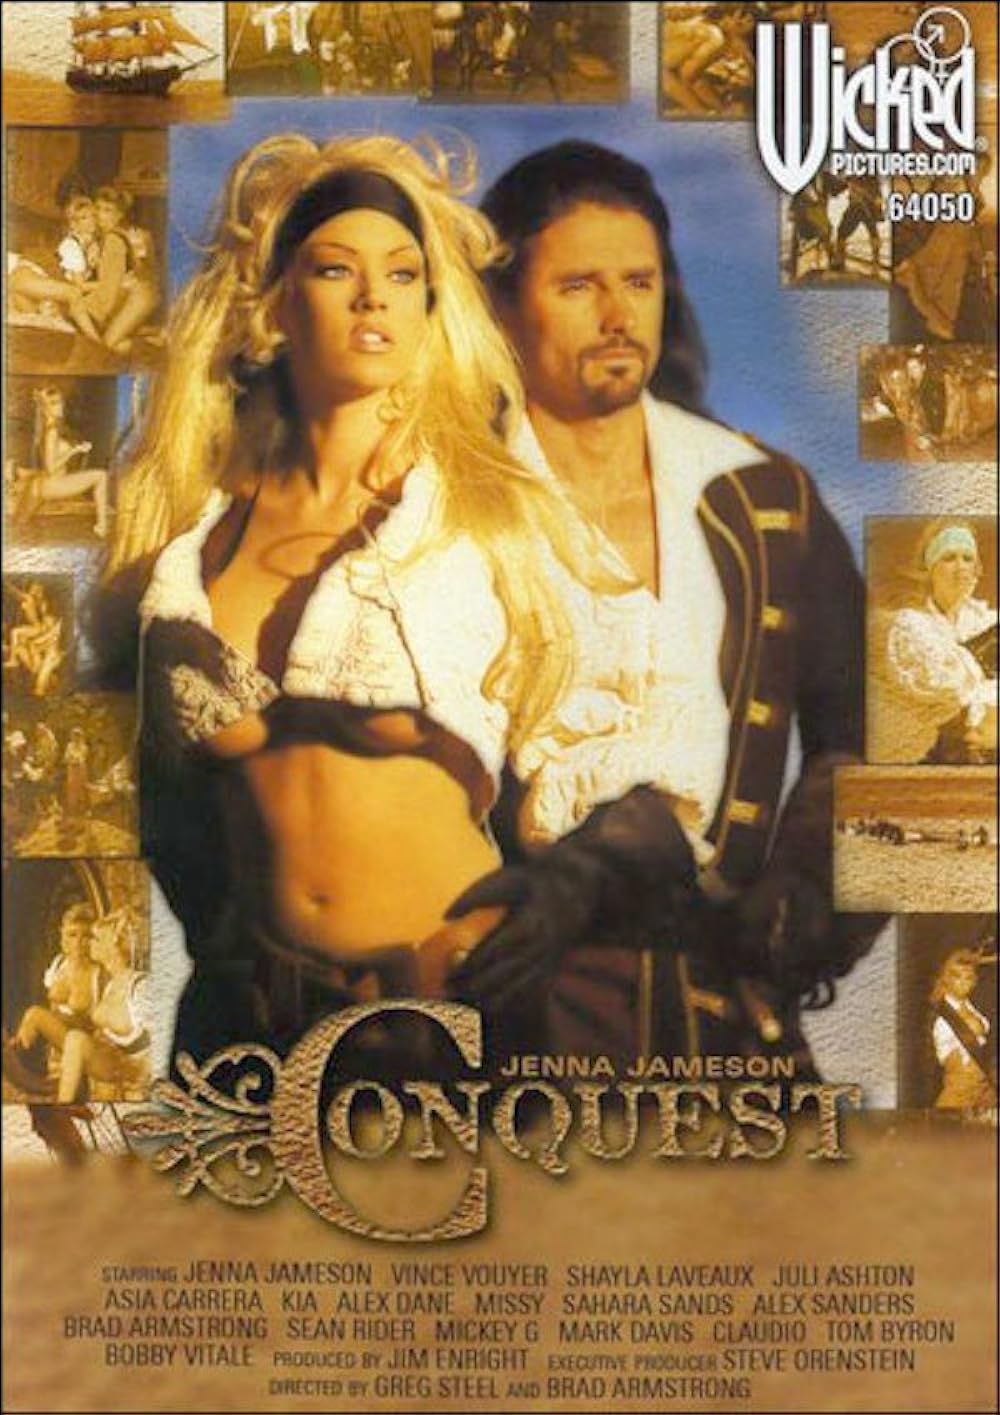 chris dacey recommends jenna jameson pirate movie pic